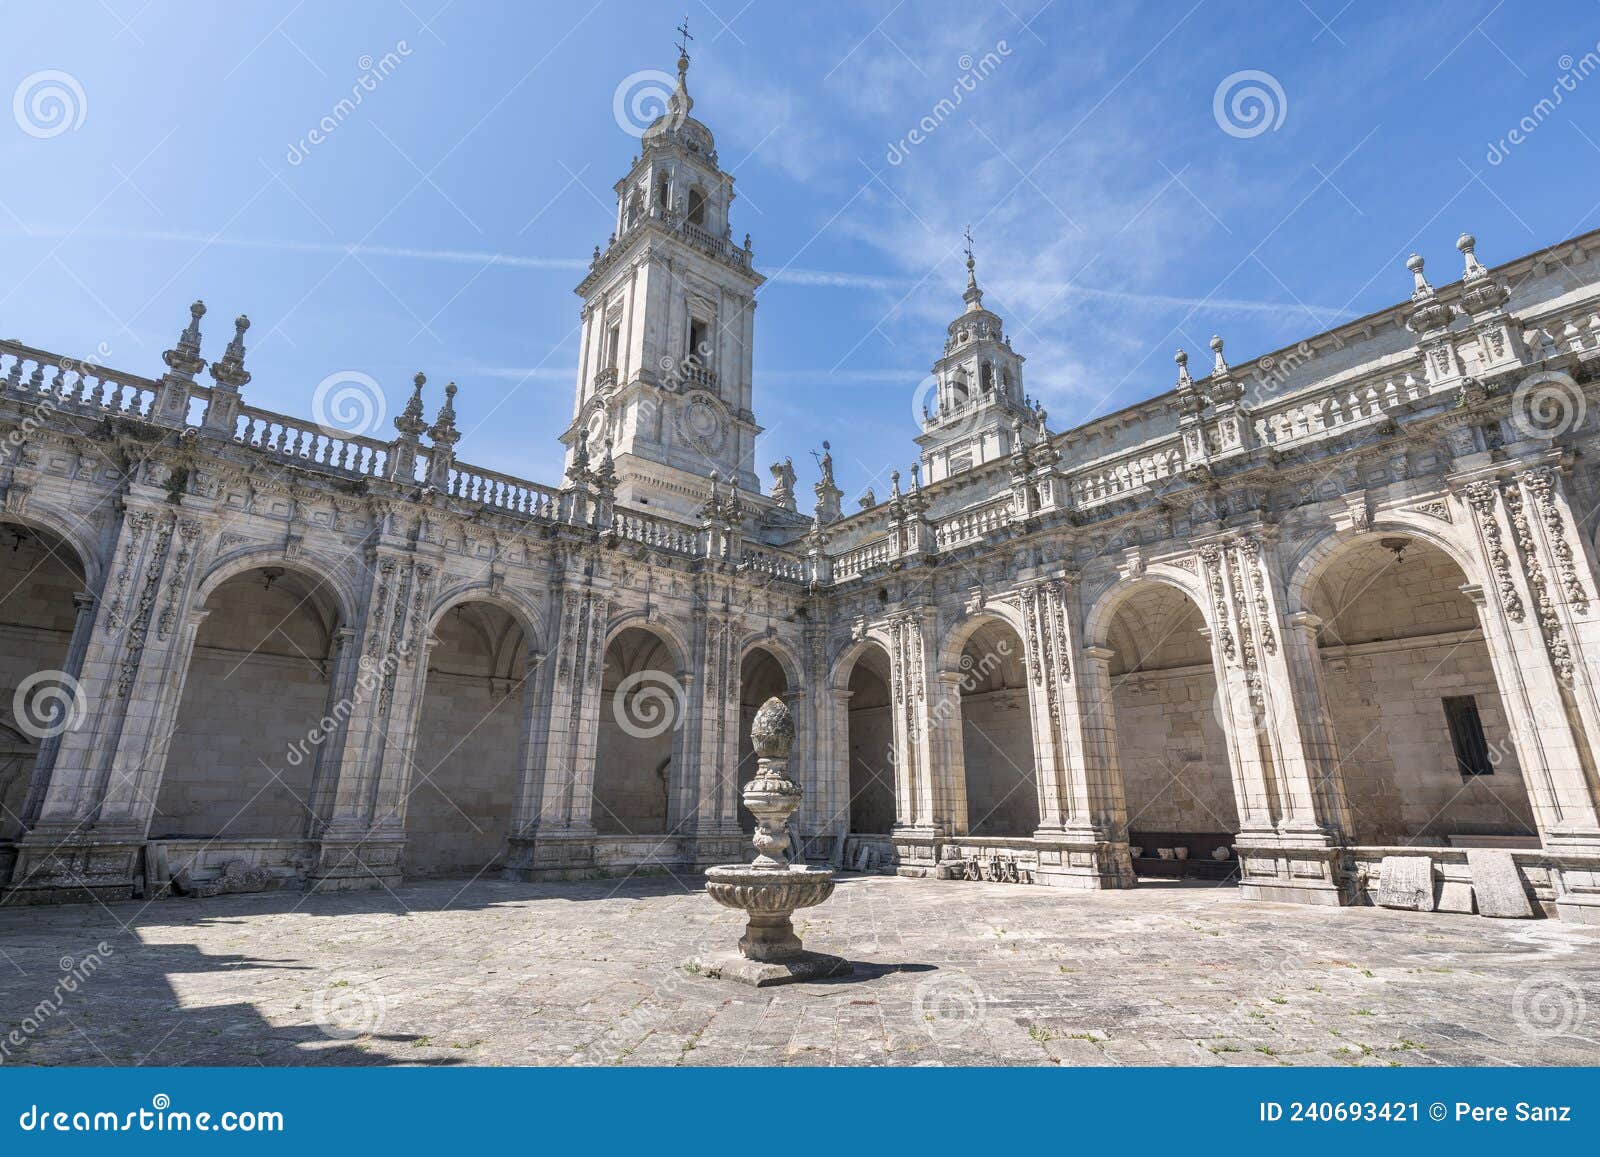 cloister of the cathedral of lugo, galicia